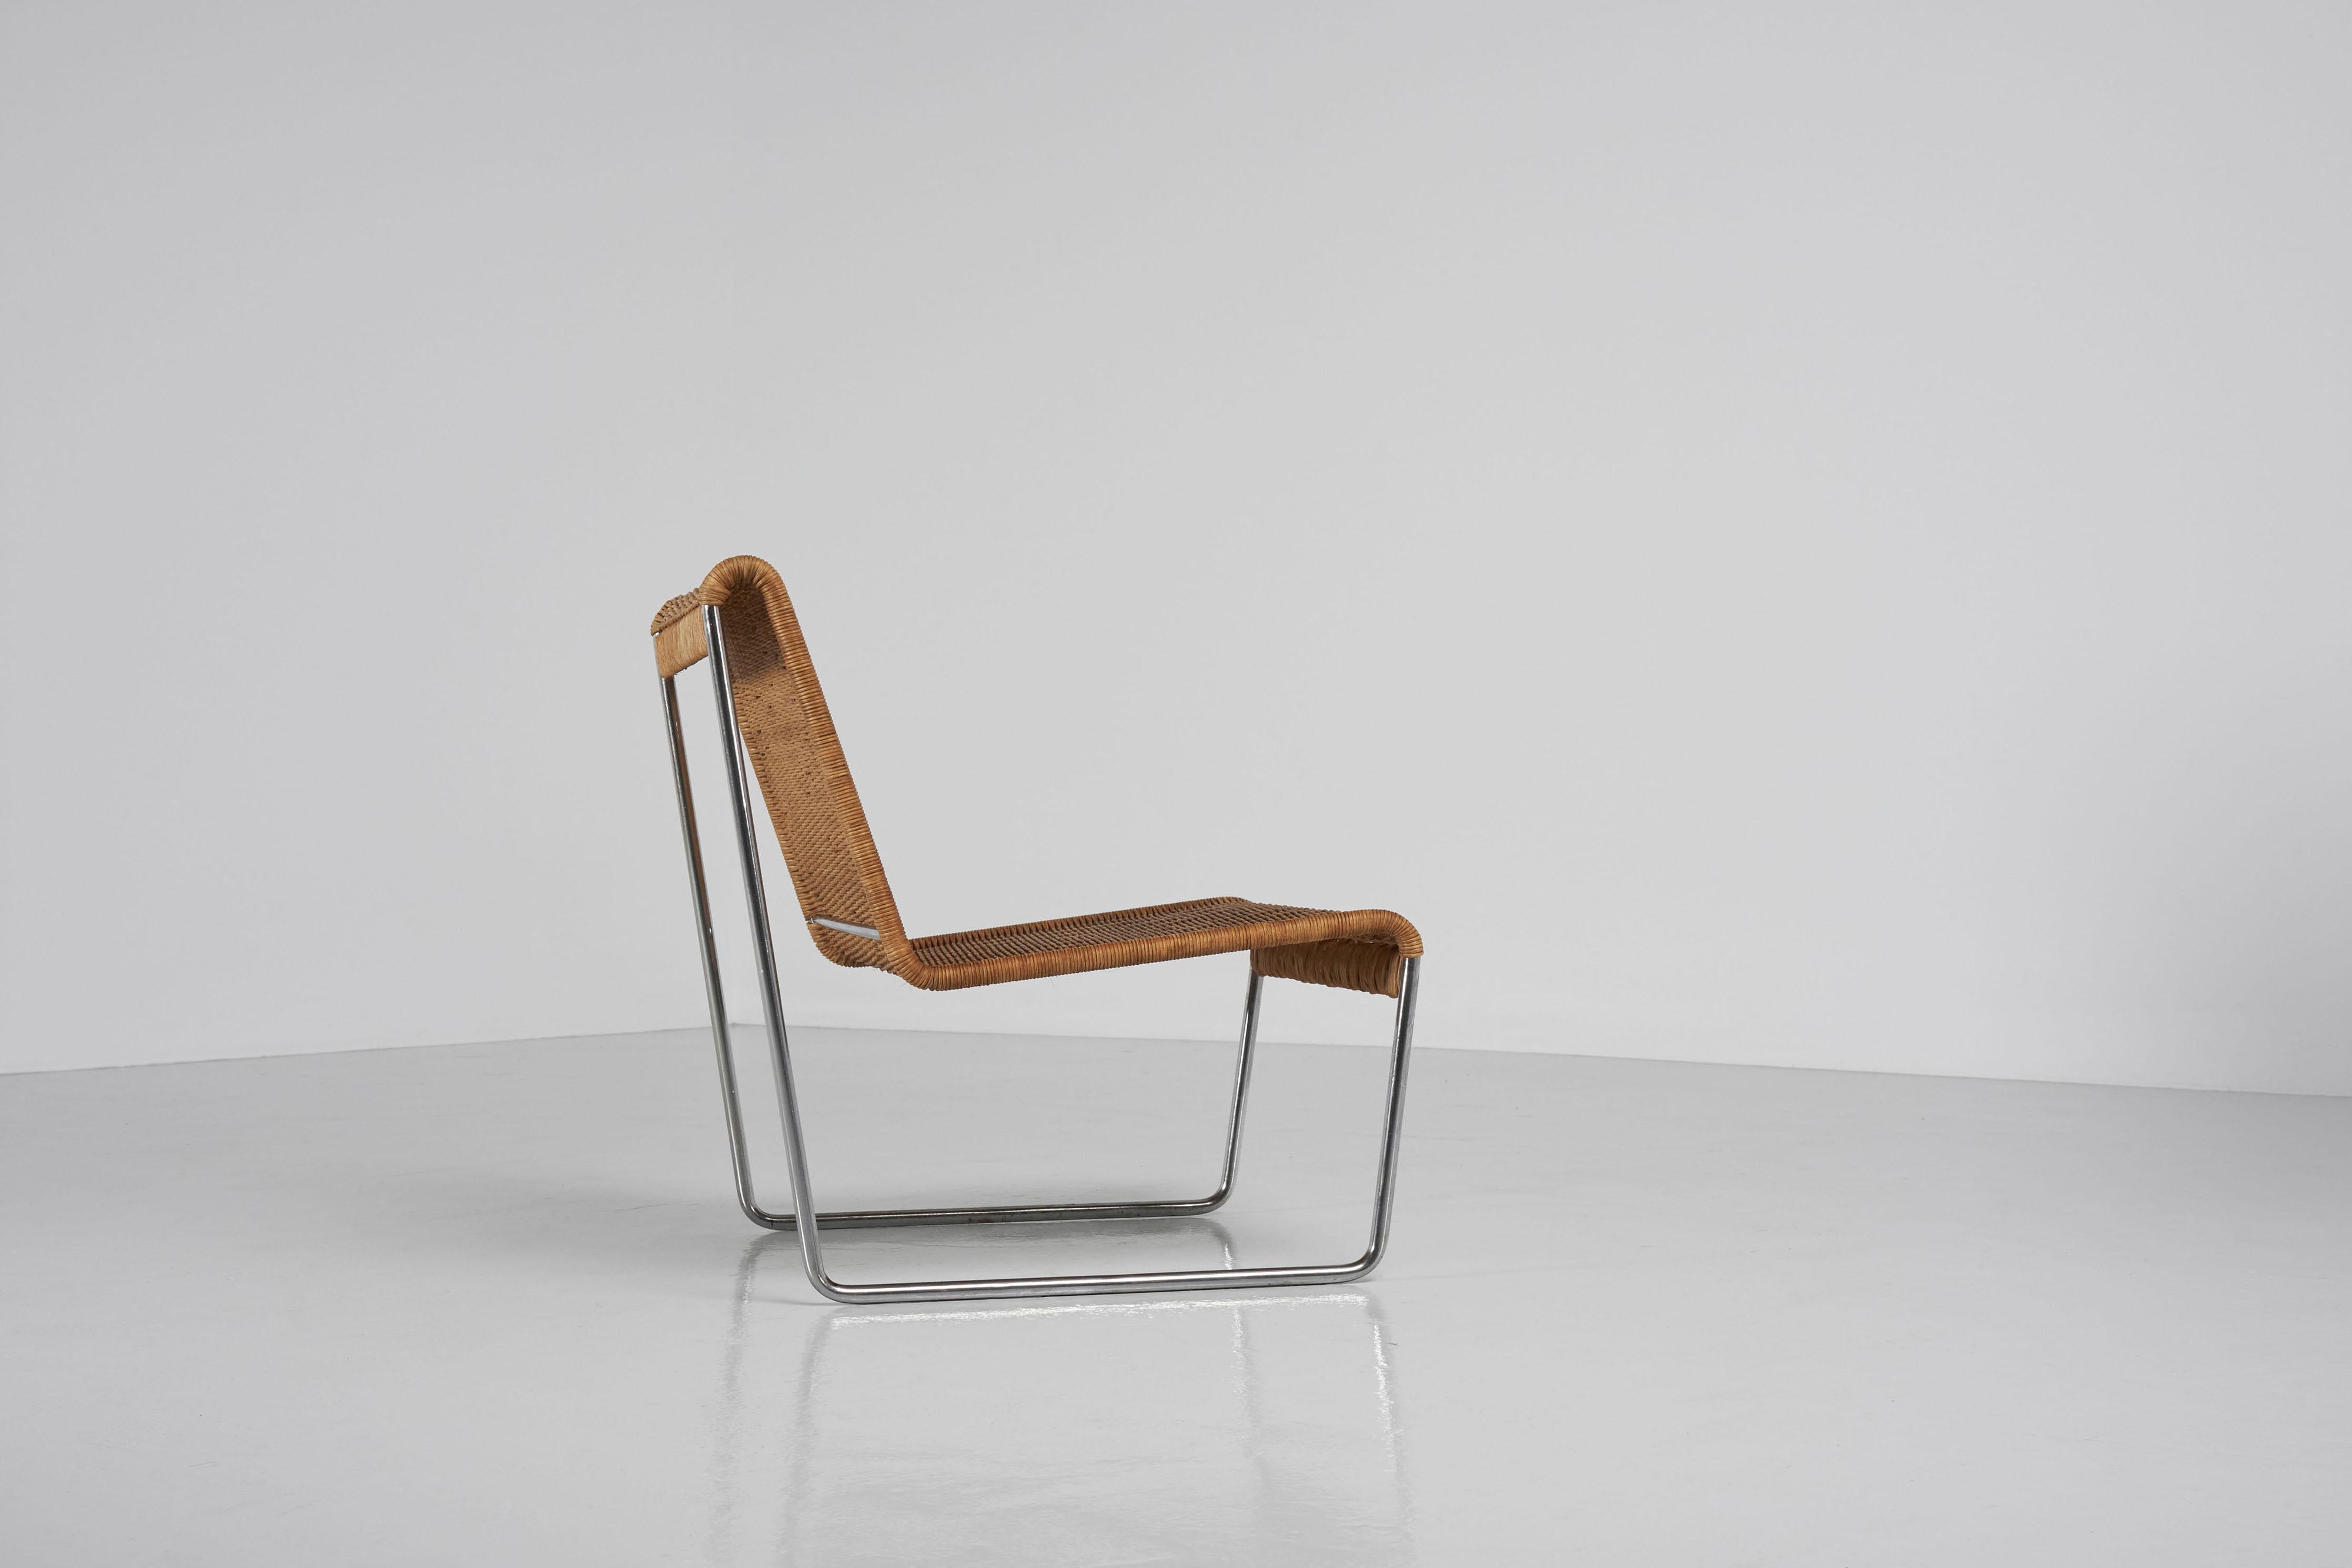 Tubular modernist lounge chair Germany 1960s In Good Condition For Sale In Roosendaal, Noord Brabant